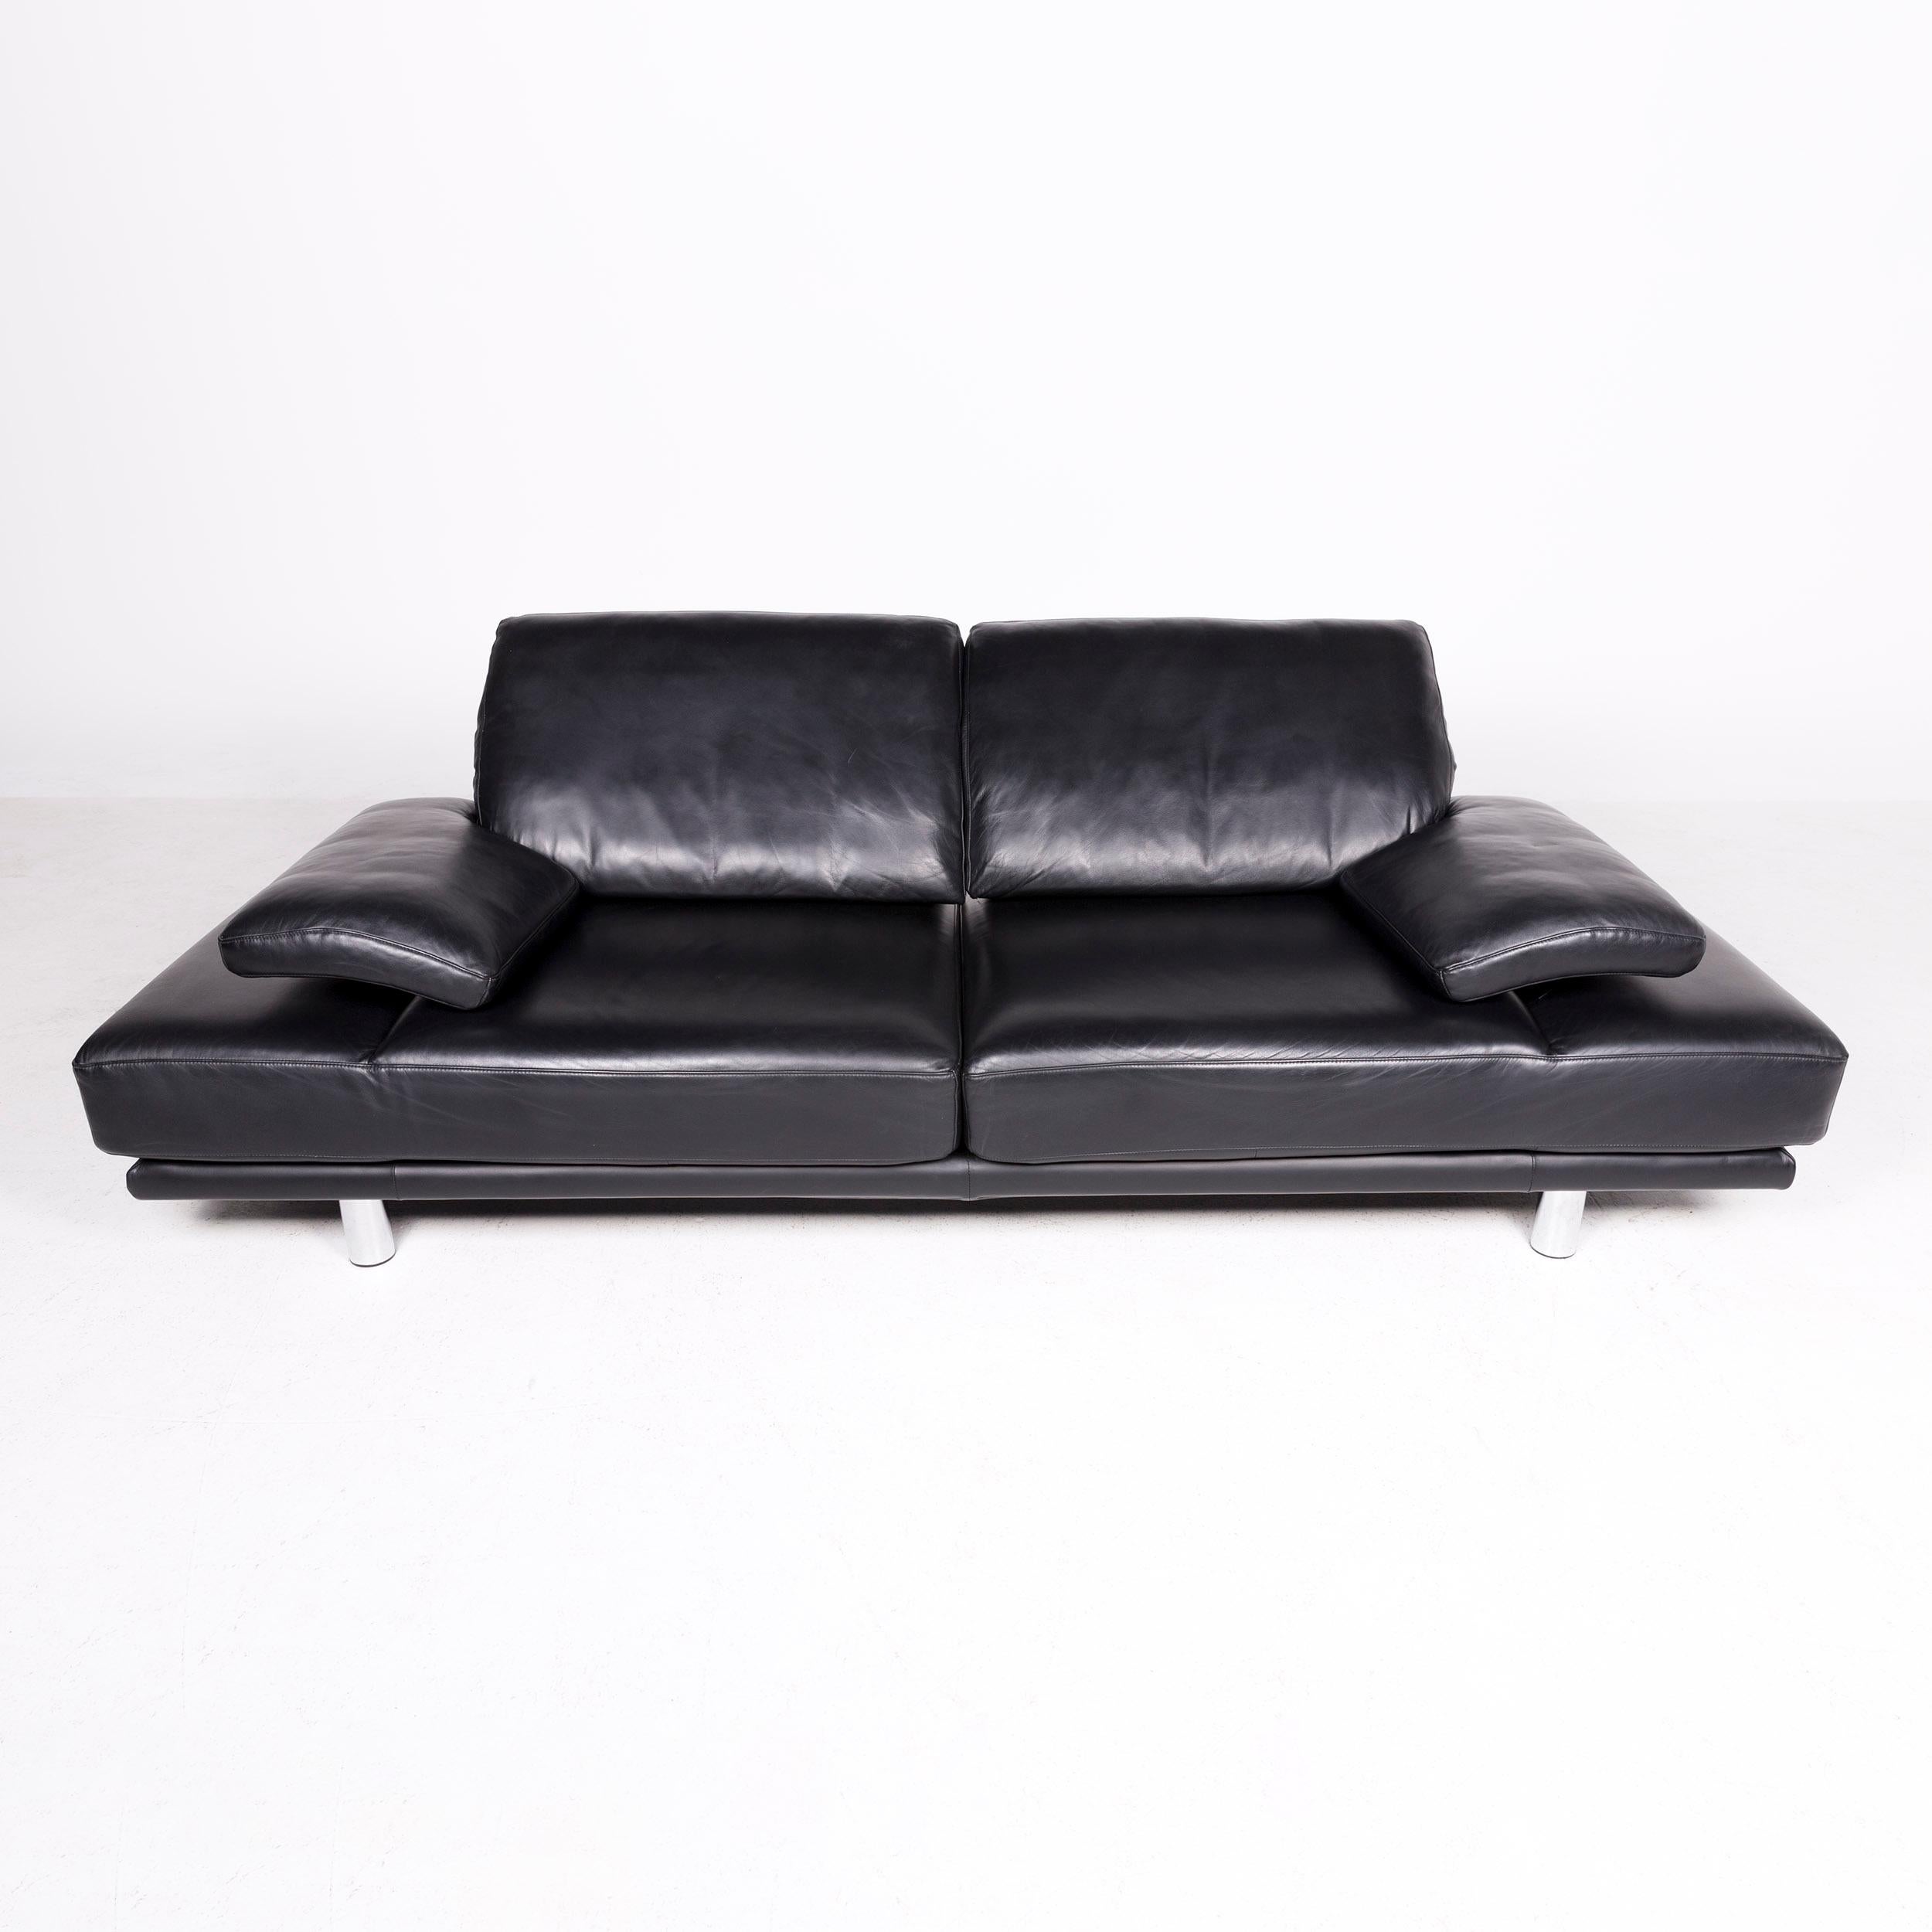 Rolf Benz 2400 Designer Leather Sofa Black Genuine Leather Three-Seat Couch For Sale 2